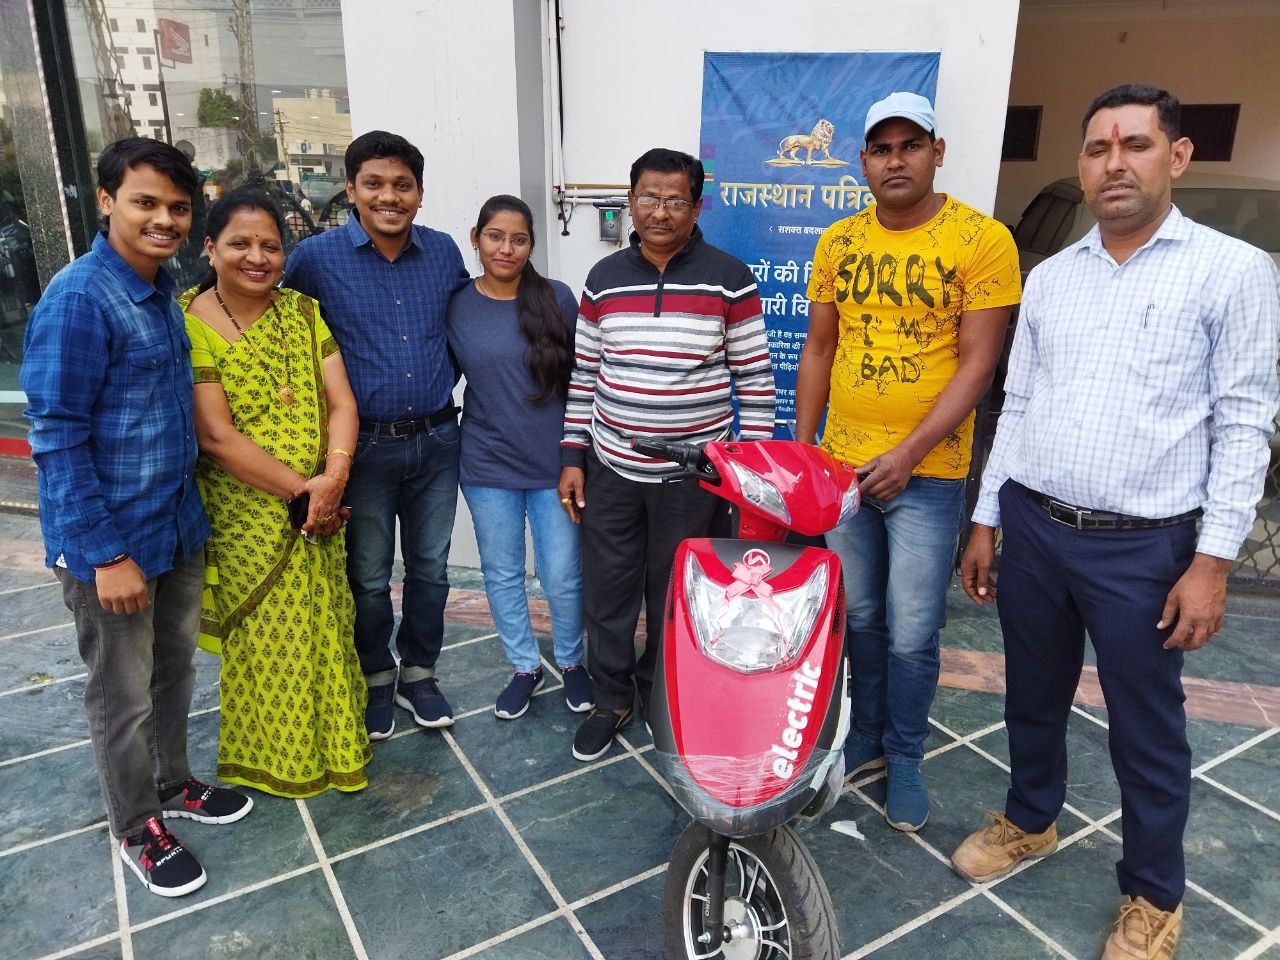 Scooty gifted to Rajasthan Patrika, Somani family happy